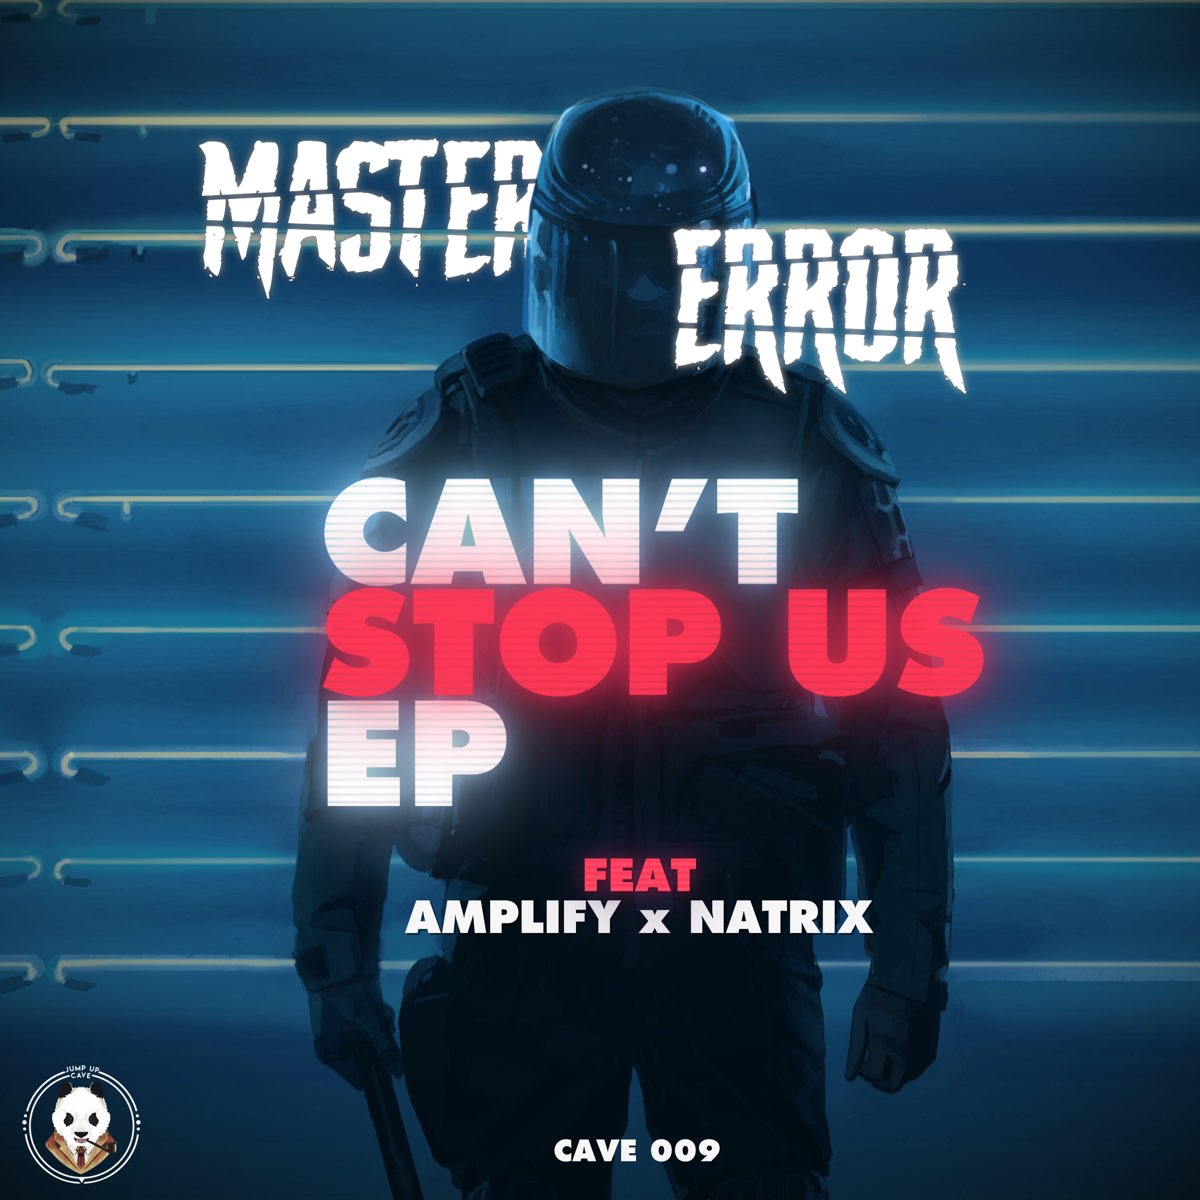 "Can't stop us Now" (Guillaume Amphoux). Bass entity.